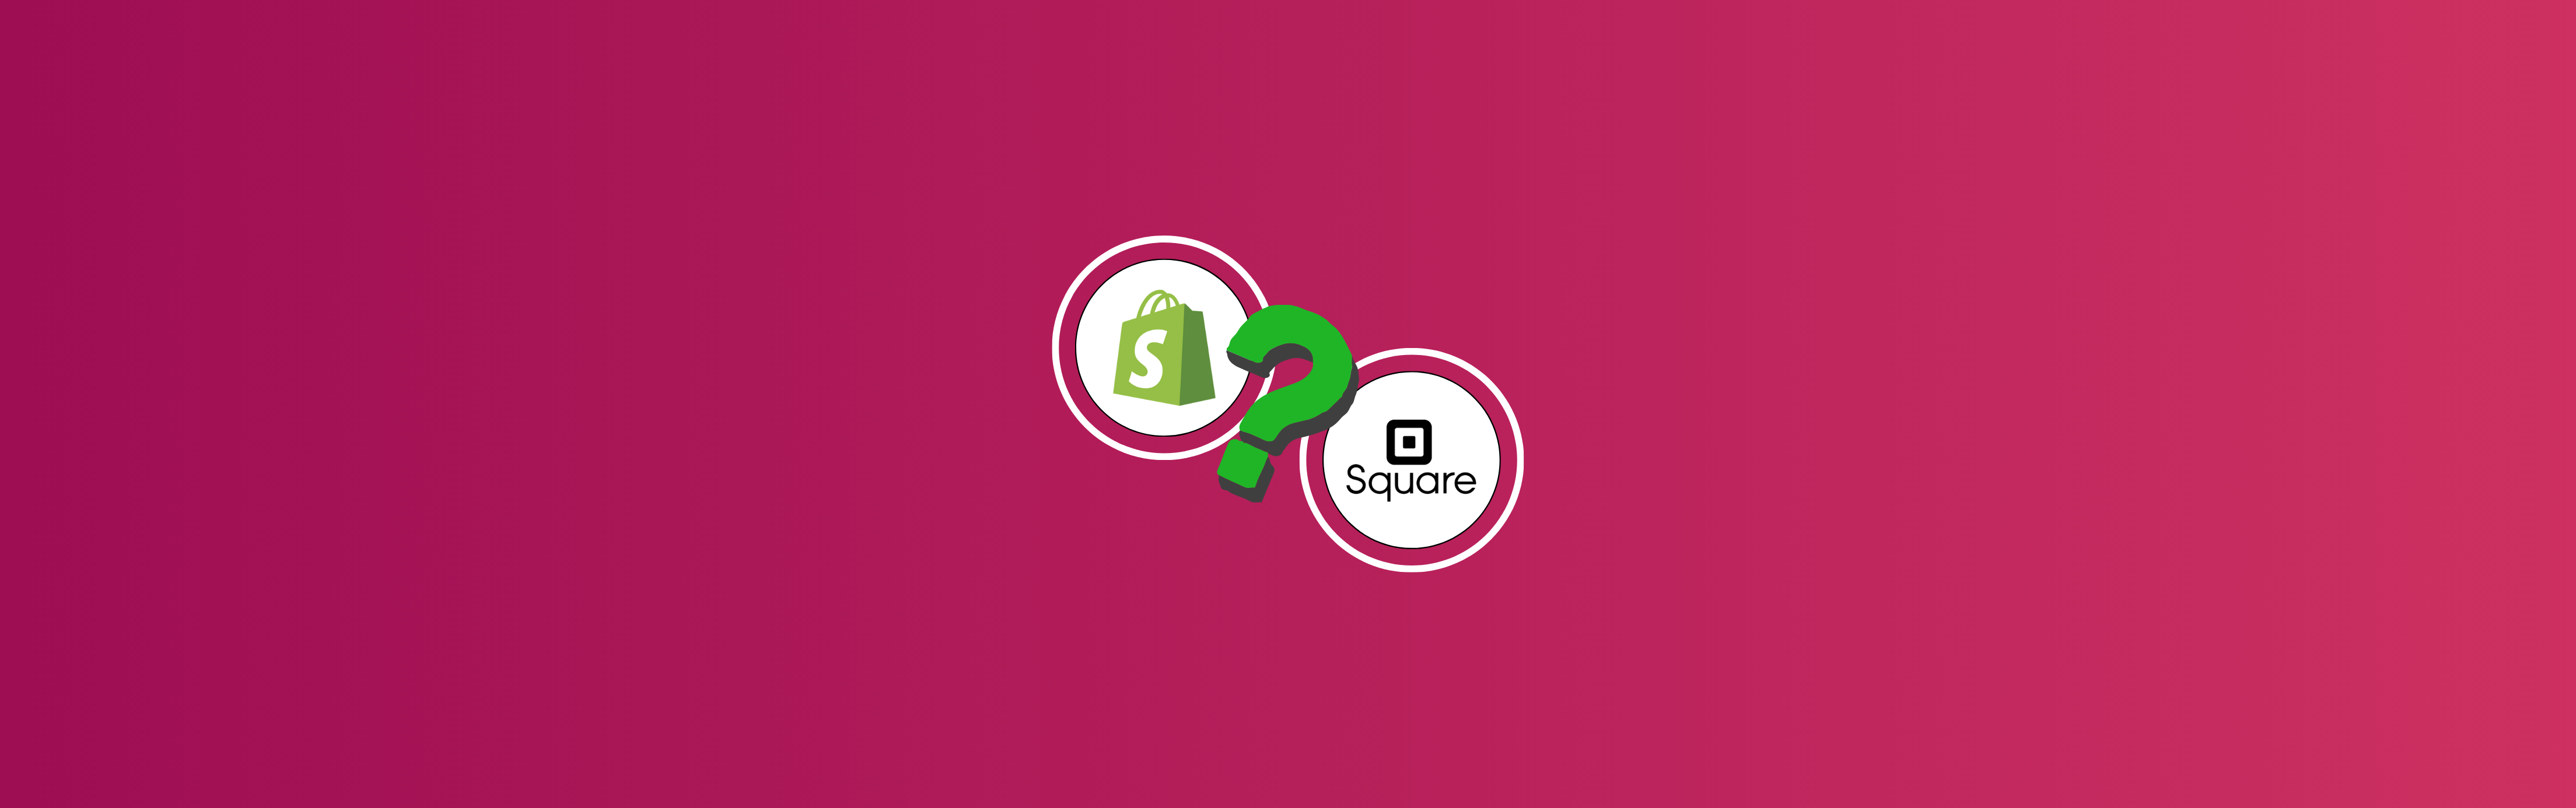 Shopify Square Integration: Navigating Integration Opportunities with Shopify and Square